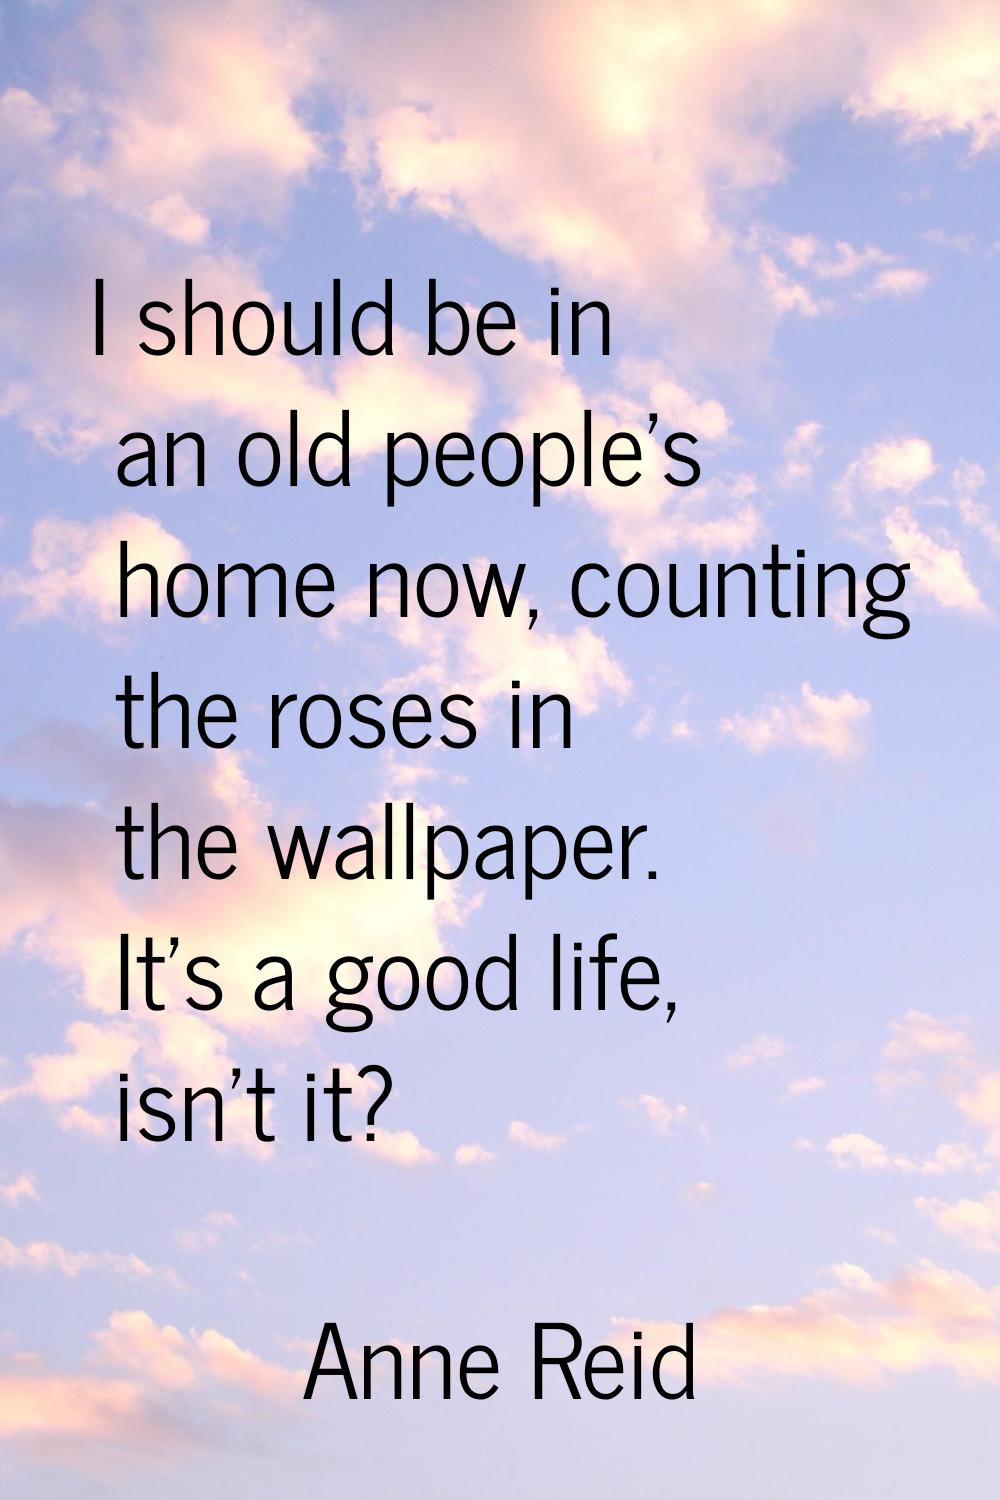 I should be in an old people's home now, counting the roses in the wallpaper. It's a good life, isn